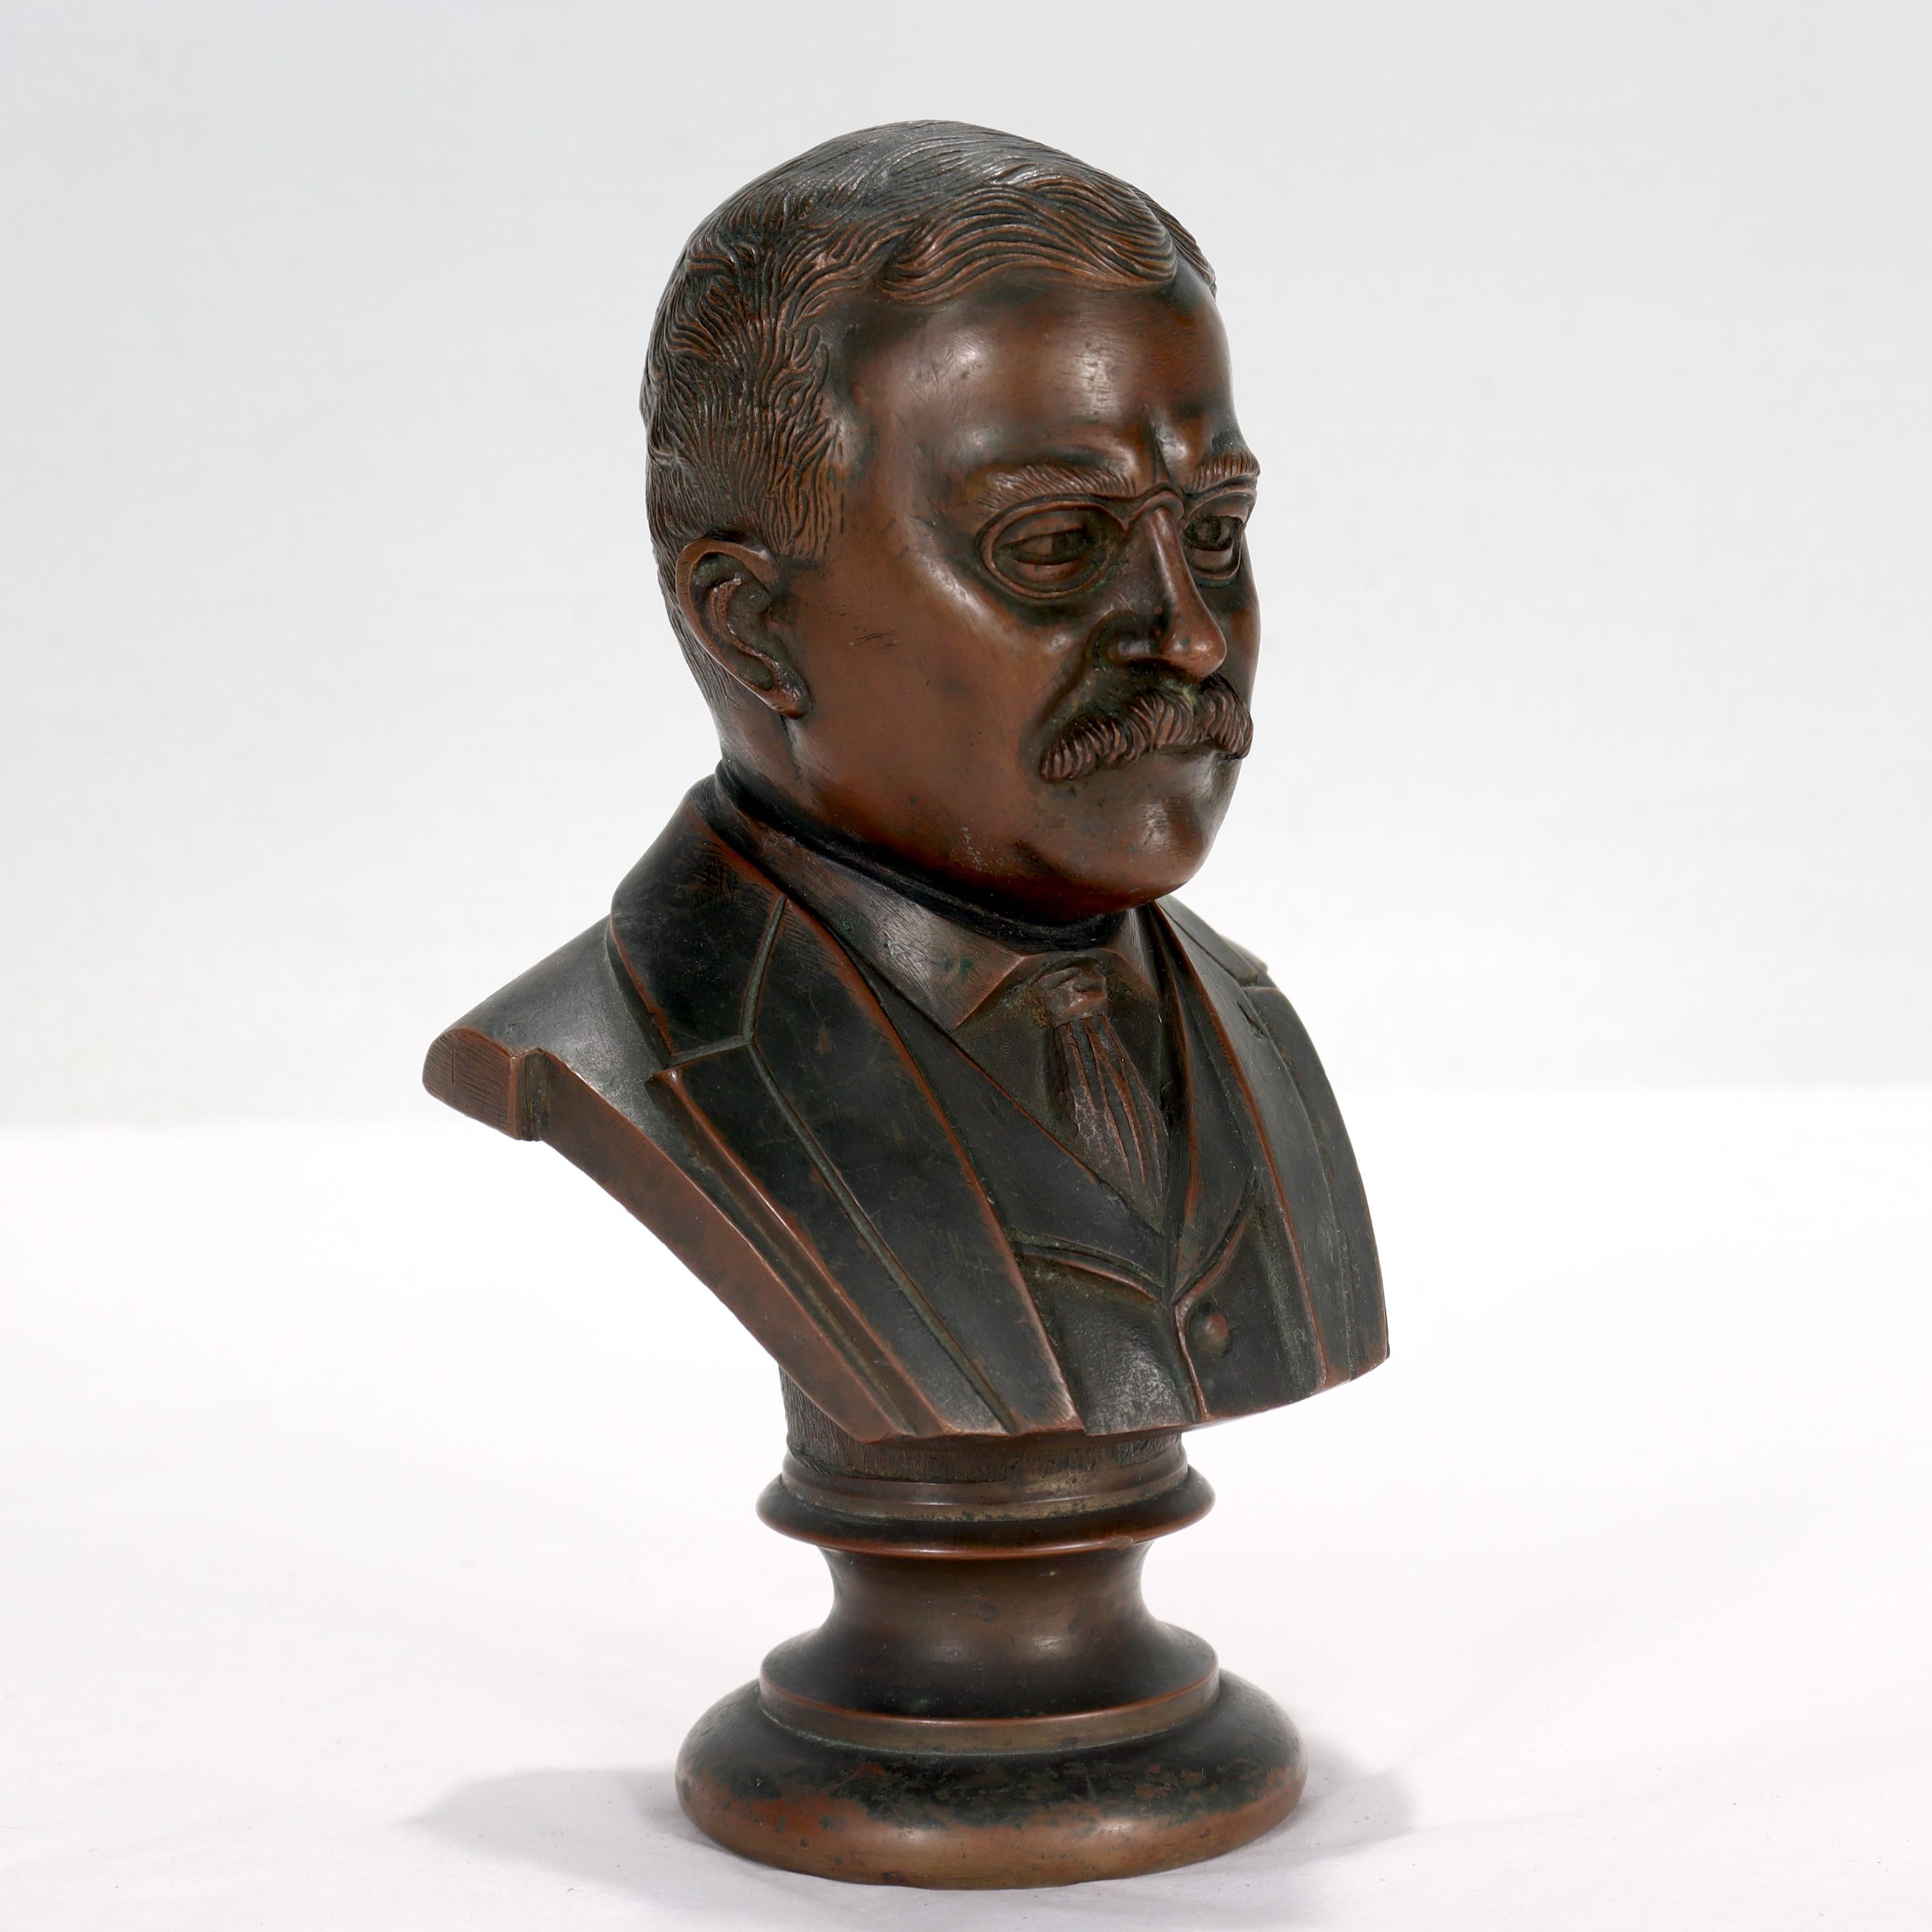 20th Century Small Desk or Cabinet Sized Bronze Bust of President Theodore 'Teddy' Roosevelt